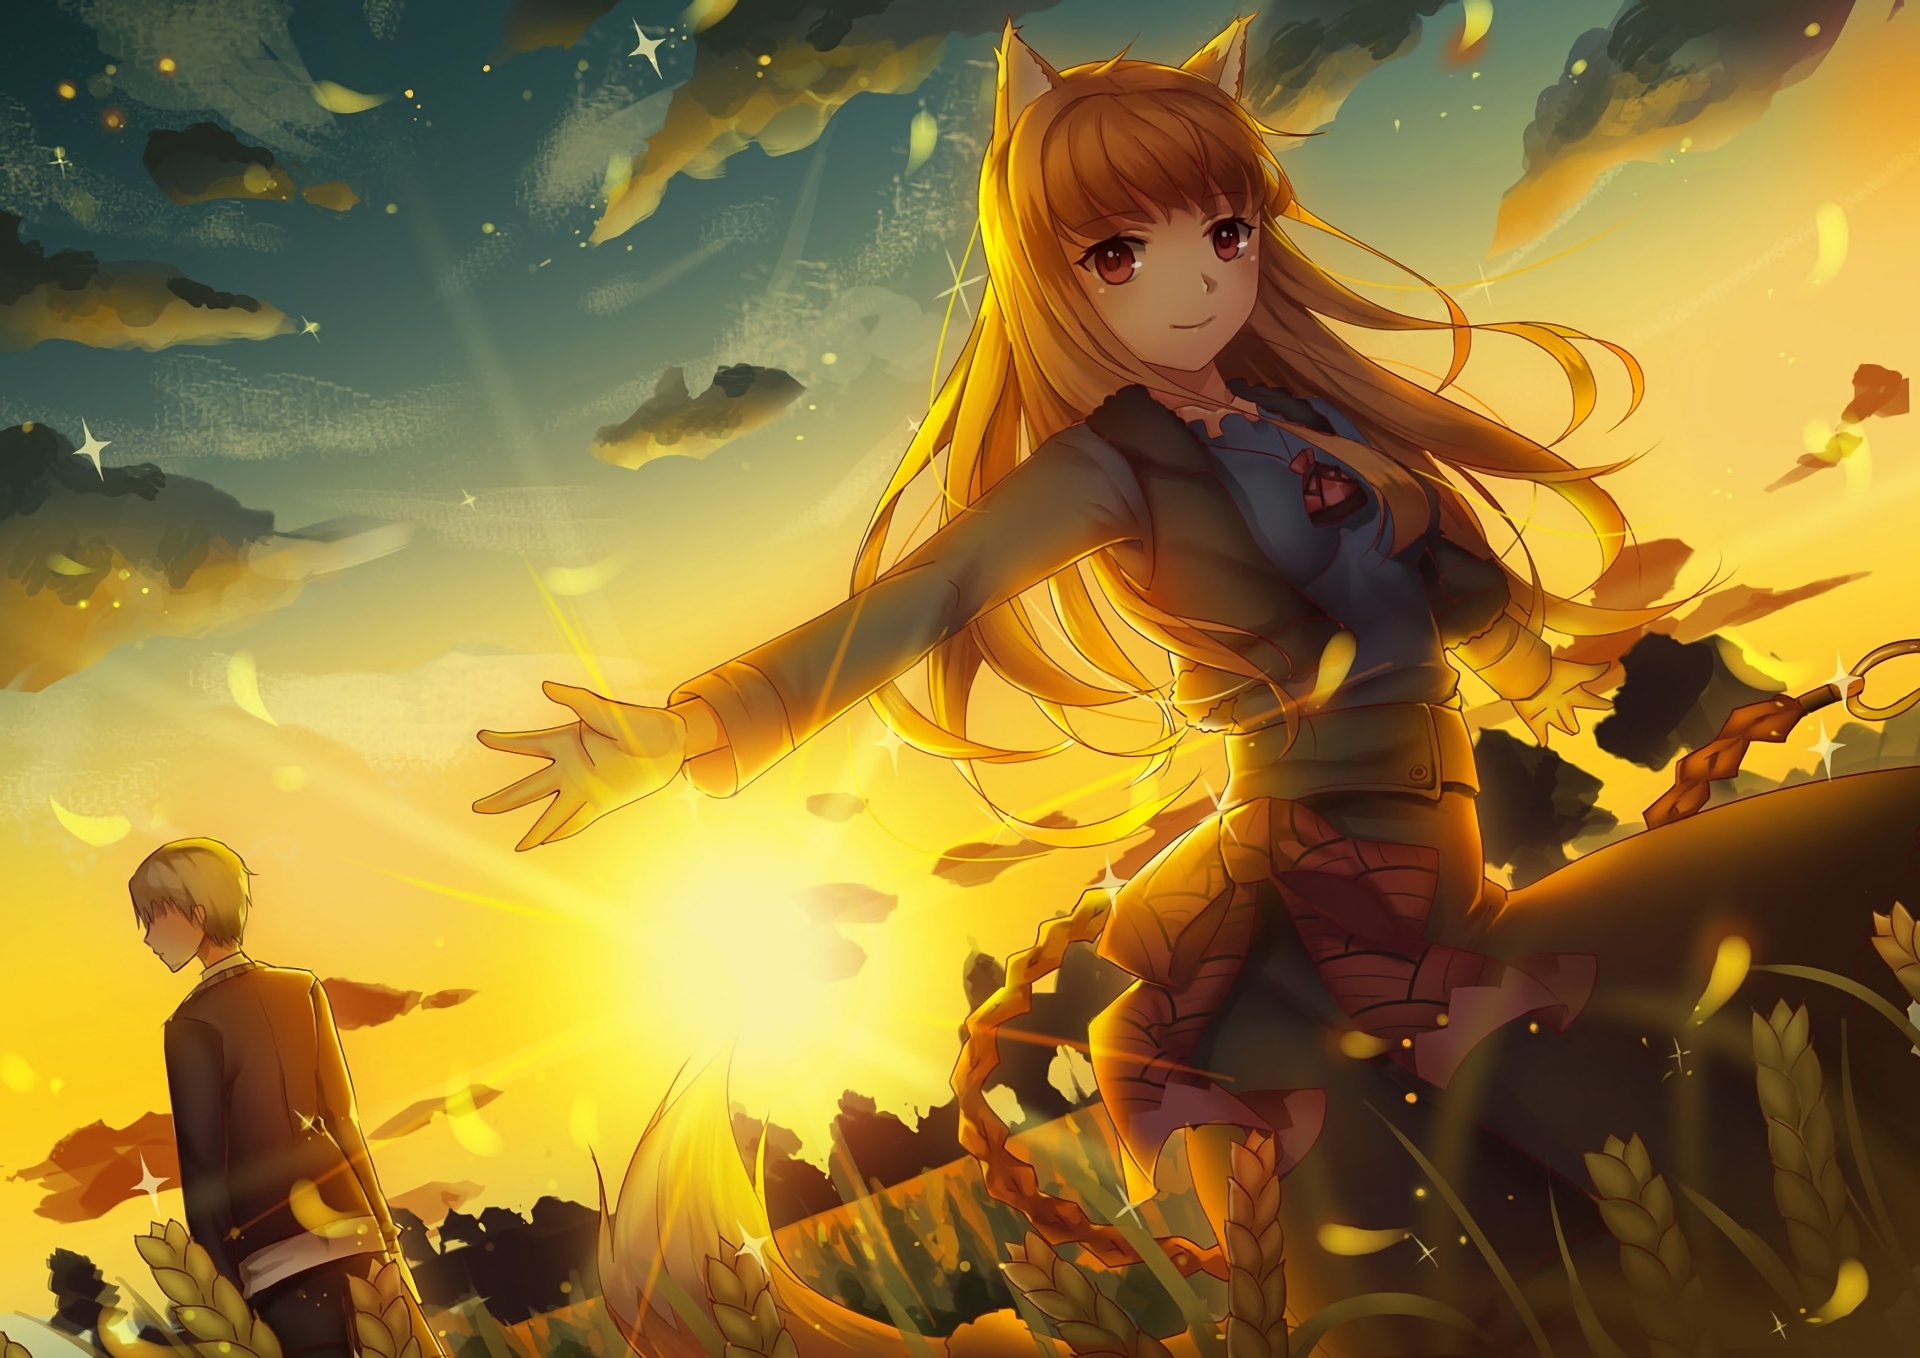 spice and wolf wallpaper,cg artwork,anime,illustration,fictional character,sky